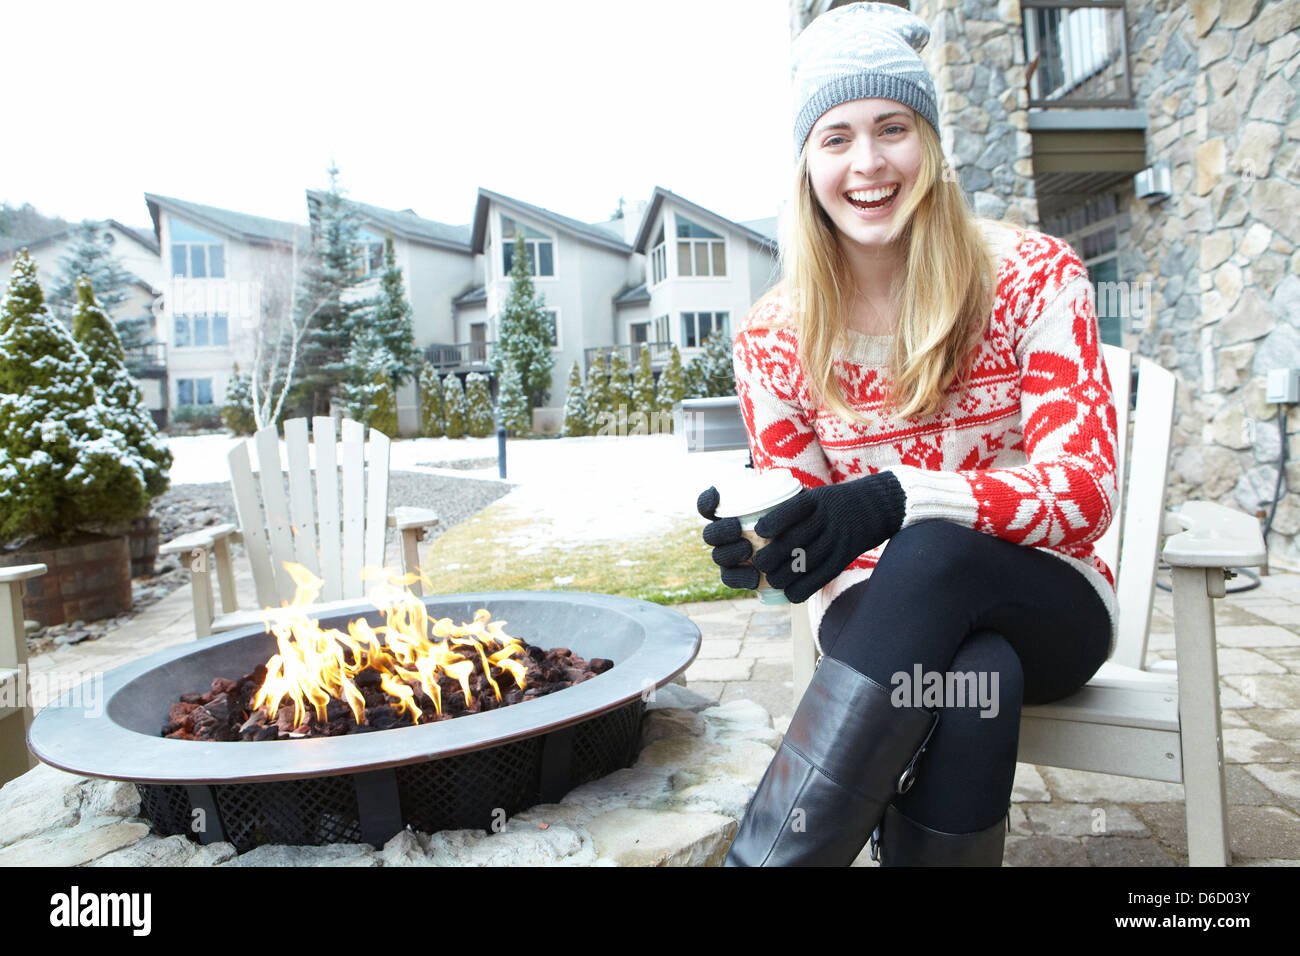 Girl with coffee in hand sitting in front of outdoor fireplace Stock Photo